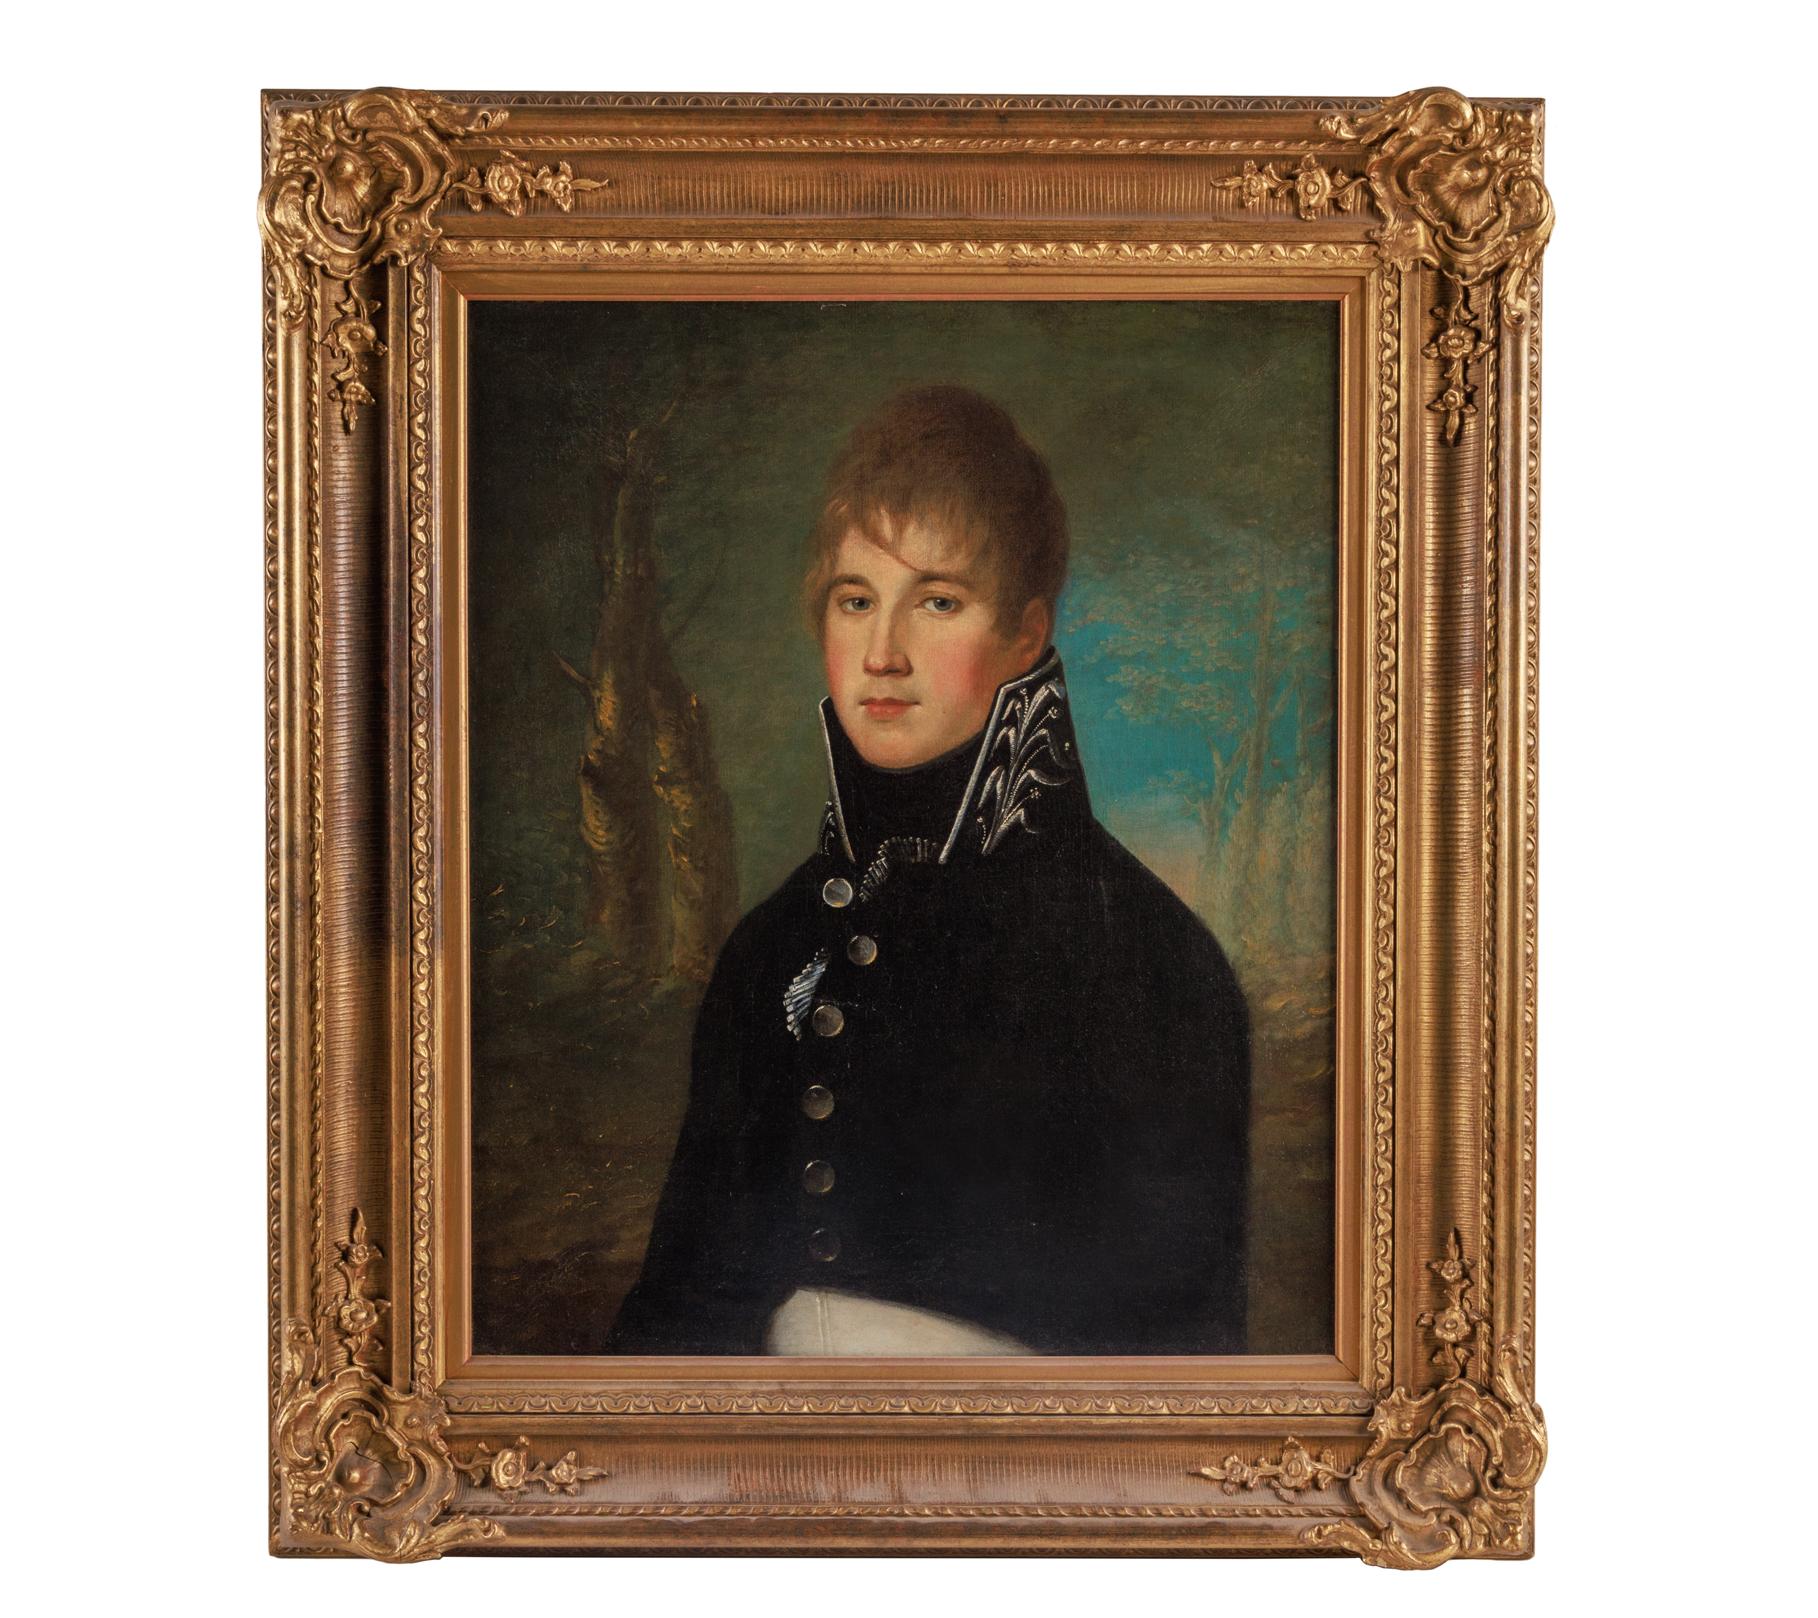 Unknown Portrait Painting - (French School, 19th Century) A Fine Quality Portrait of "A Young Officer"